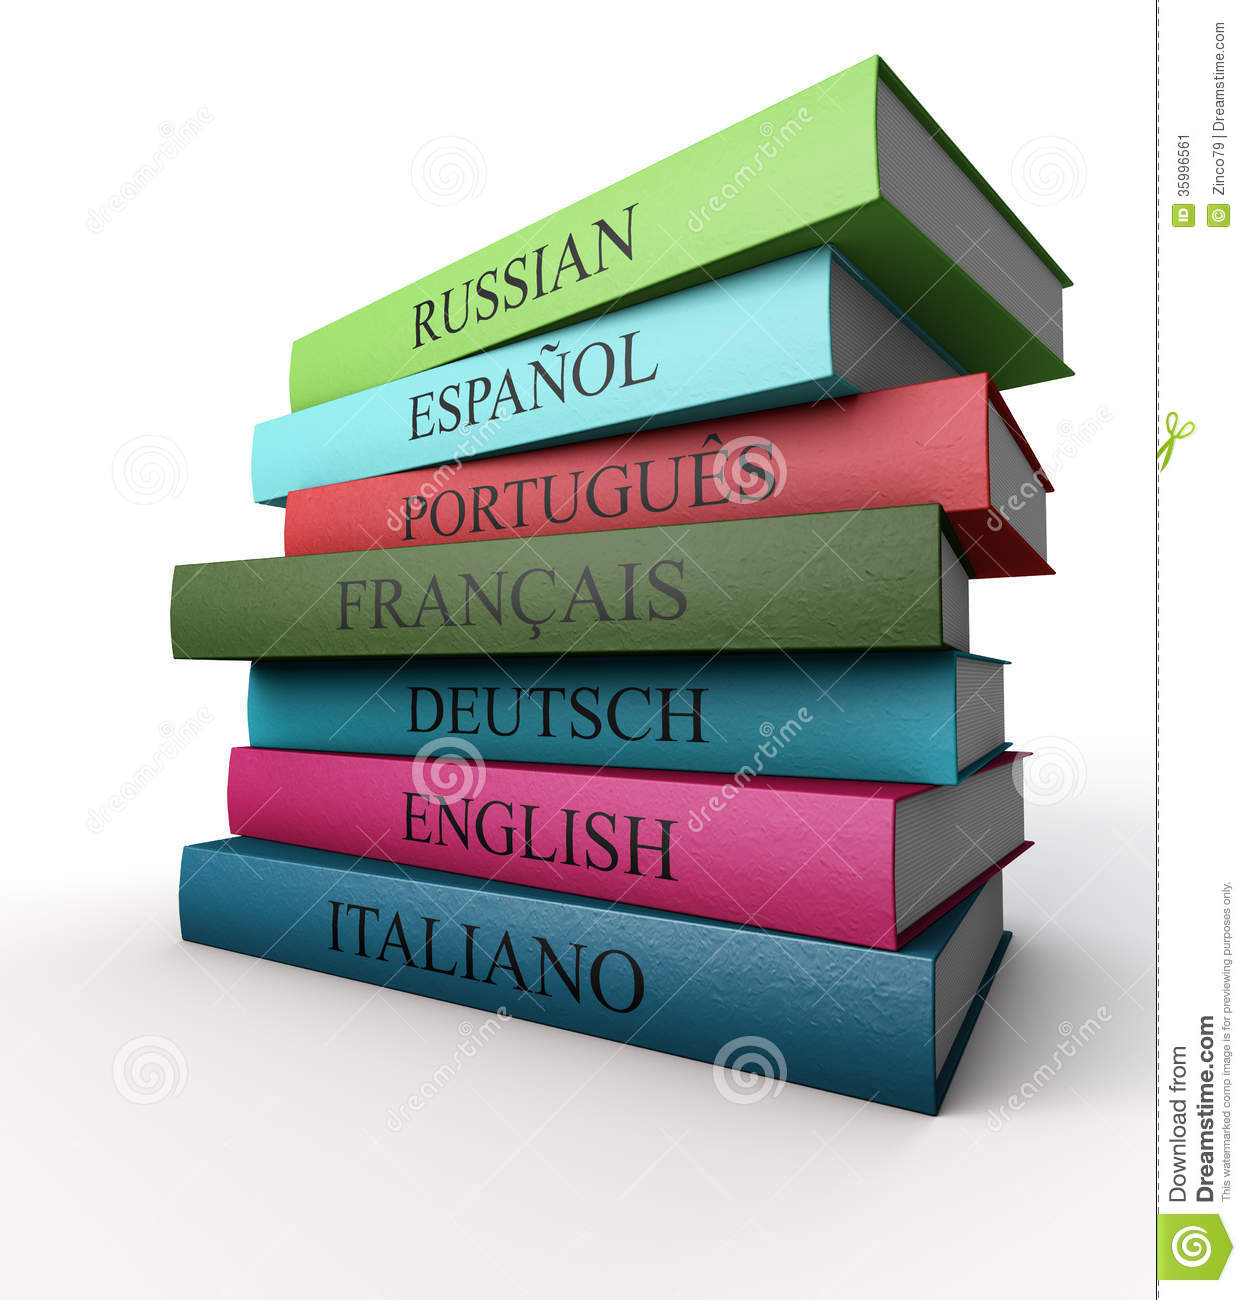 Spanish Dictionary Clipart Seven Dictionaries Each Other